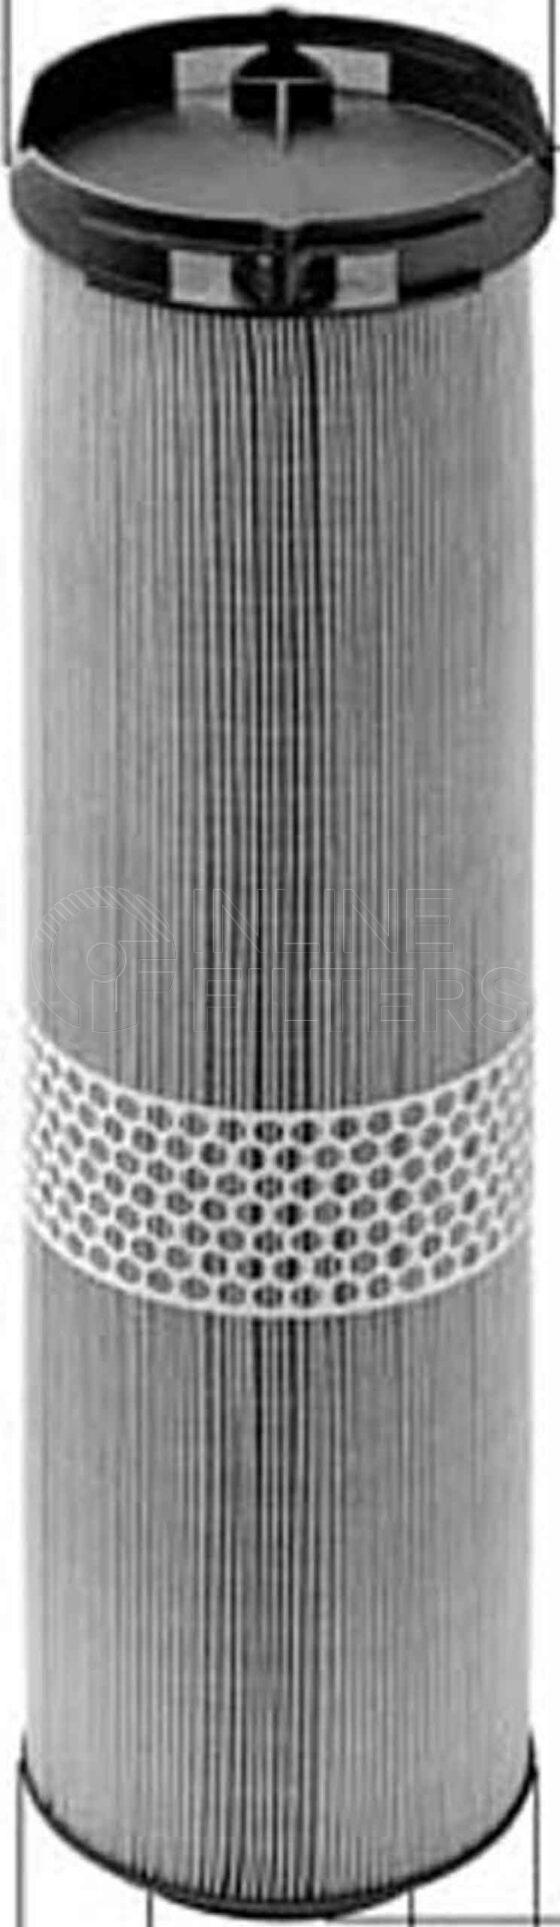 Inline FA11985. Air Filter Product – Cartridge – Round Product Air filter product